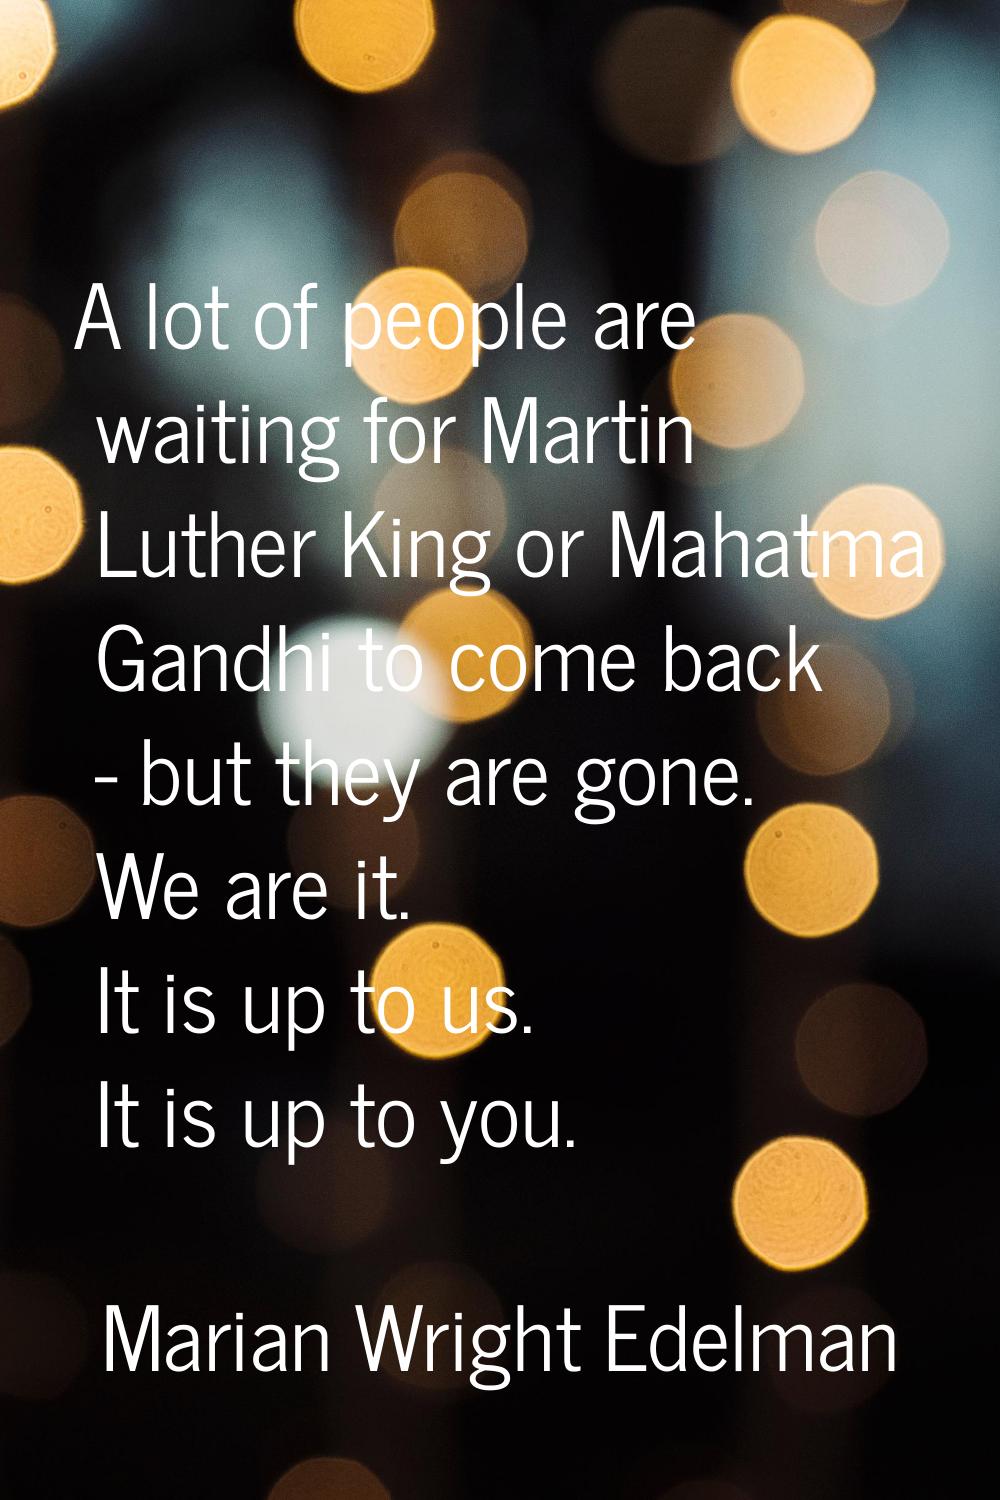 A lot of people are waiting for Martin Luther King or Mahatma Gandhi to come back - but they are go